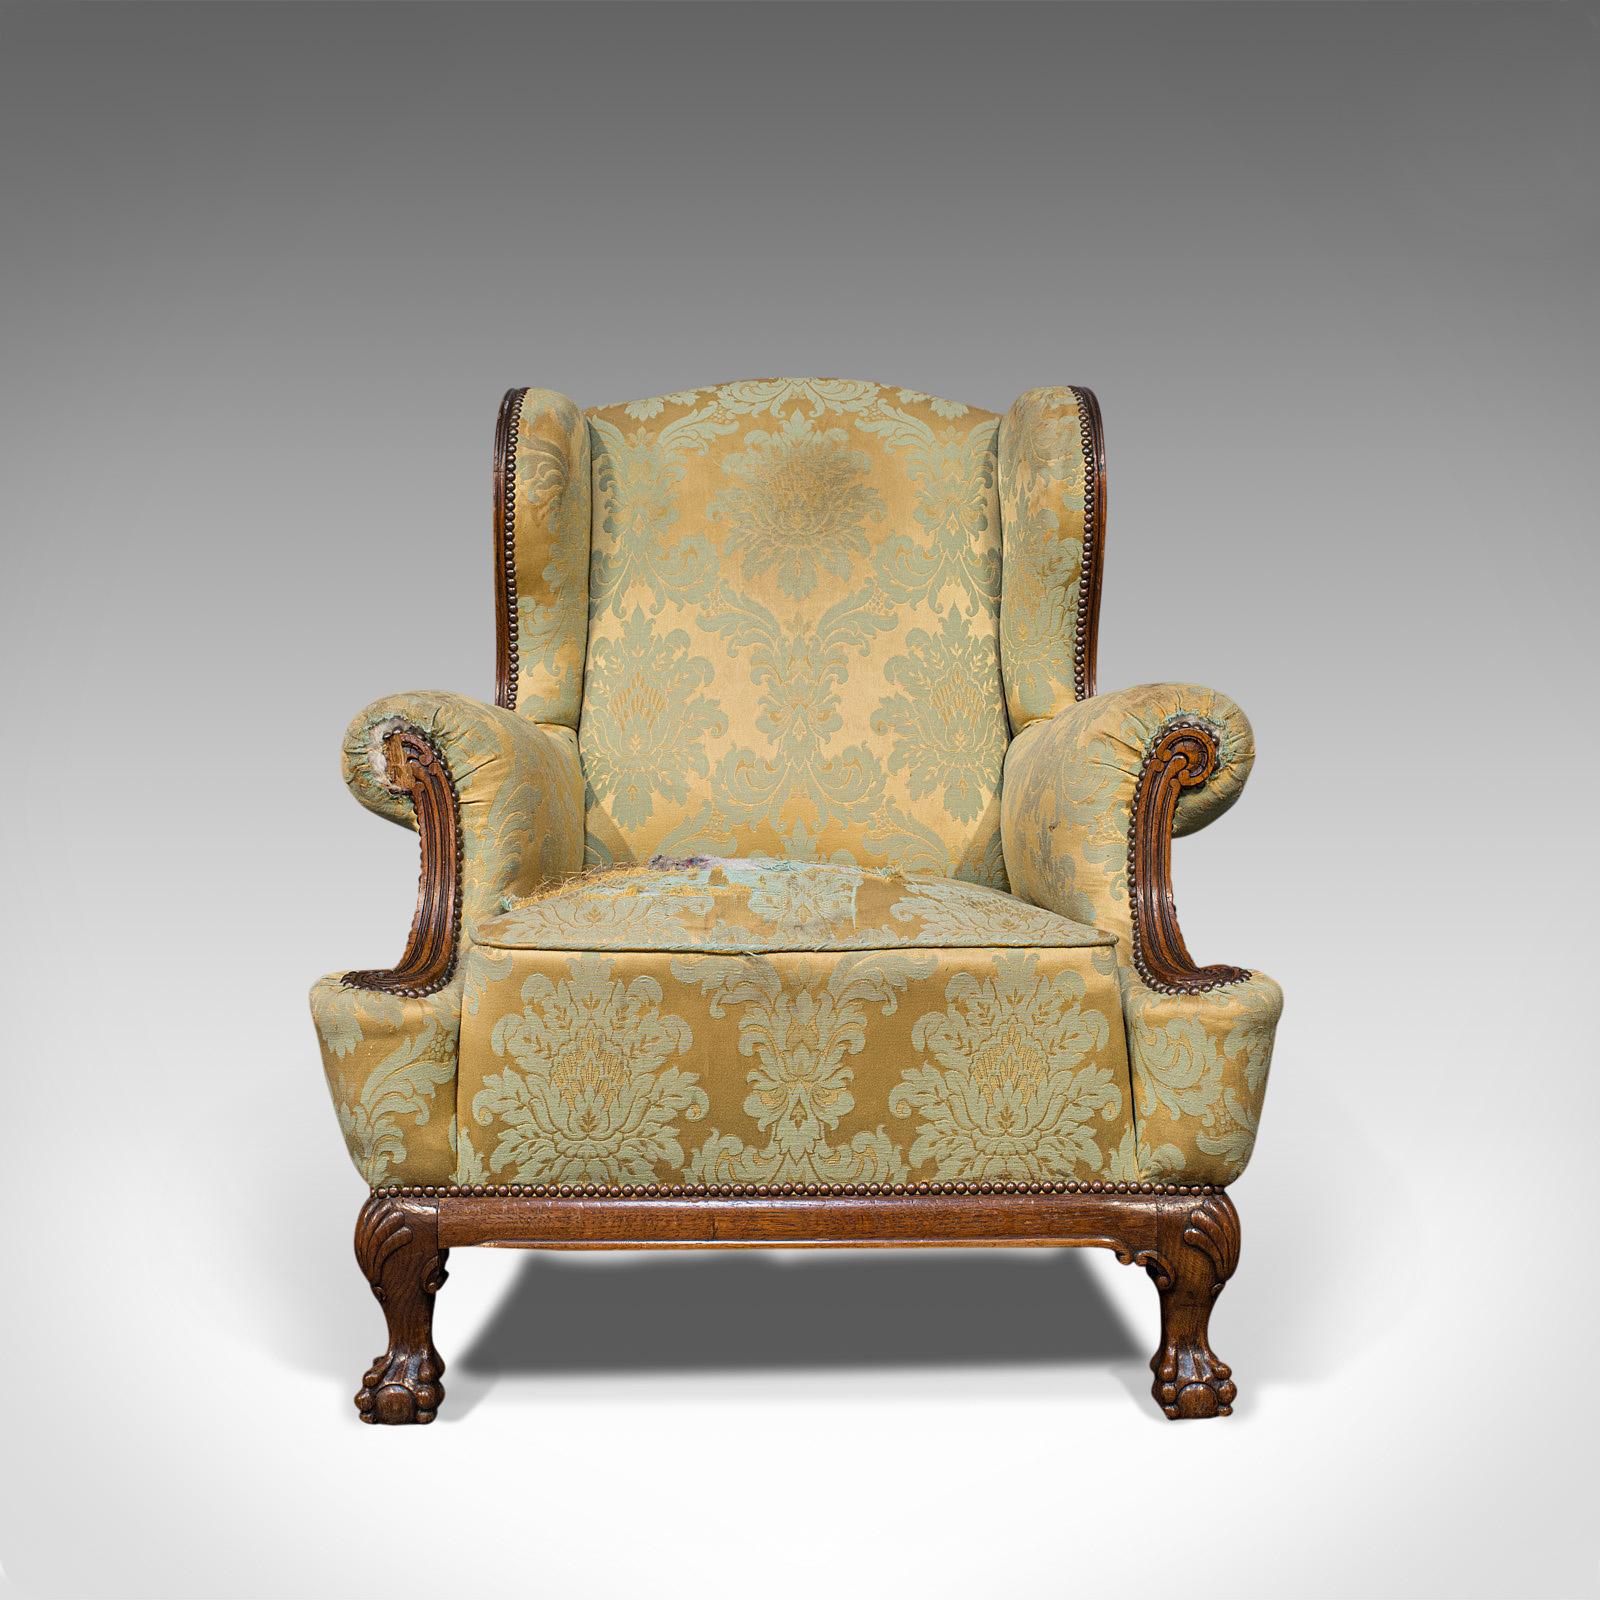 This is an antique wing-back armchair. An English, fireside or lounge seat, dating to the Edwardian period, circa 1910.

An inviting chair, seeks reupholstering to shine
Displays an authentic aged patina, signs of wear and small losses